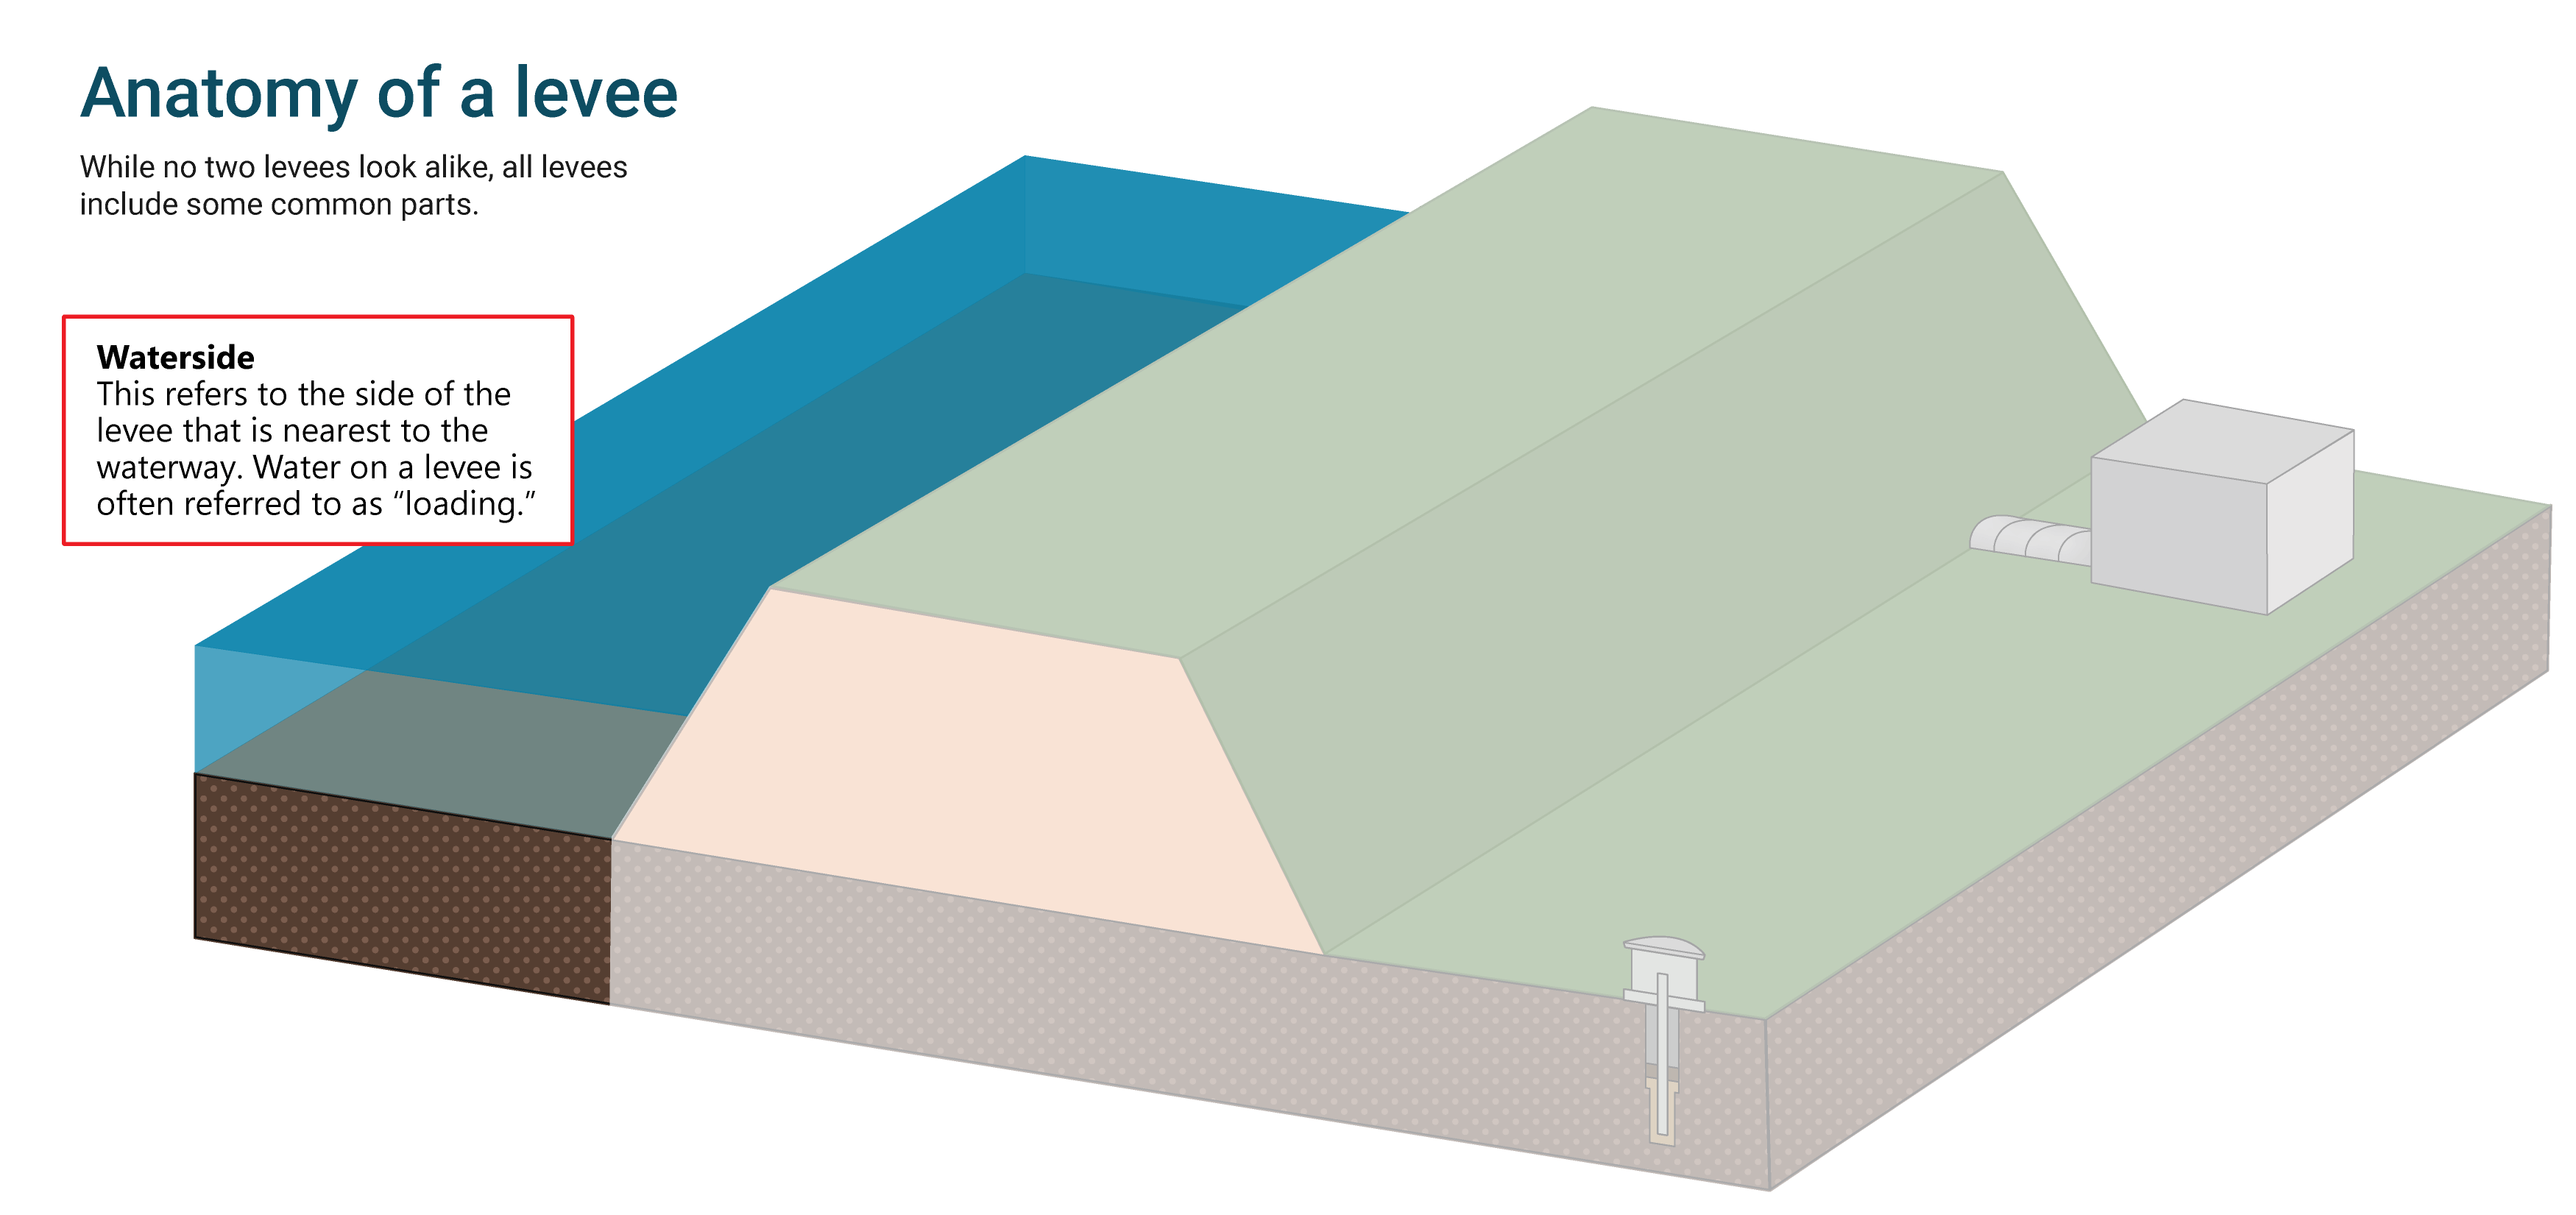 Diagram of a levee system's basic parts - Waterside